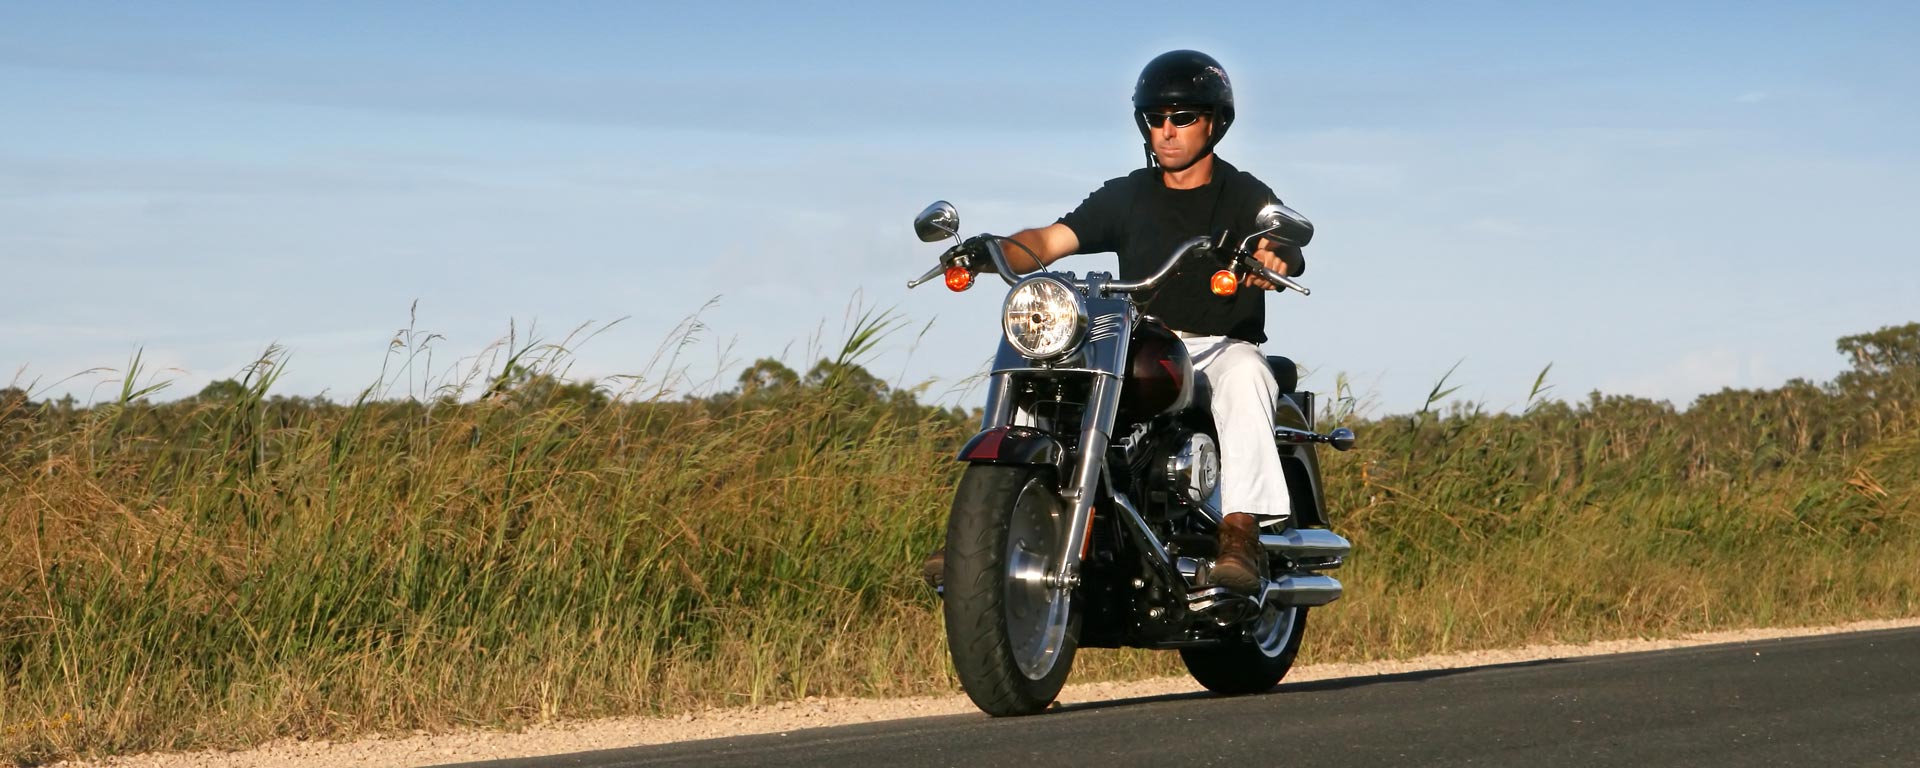 Motorcycle Insurance & More in TN